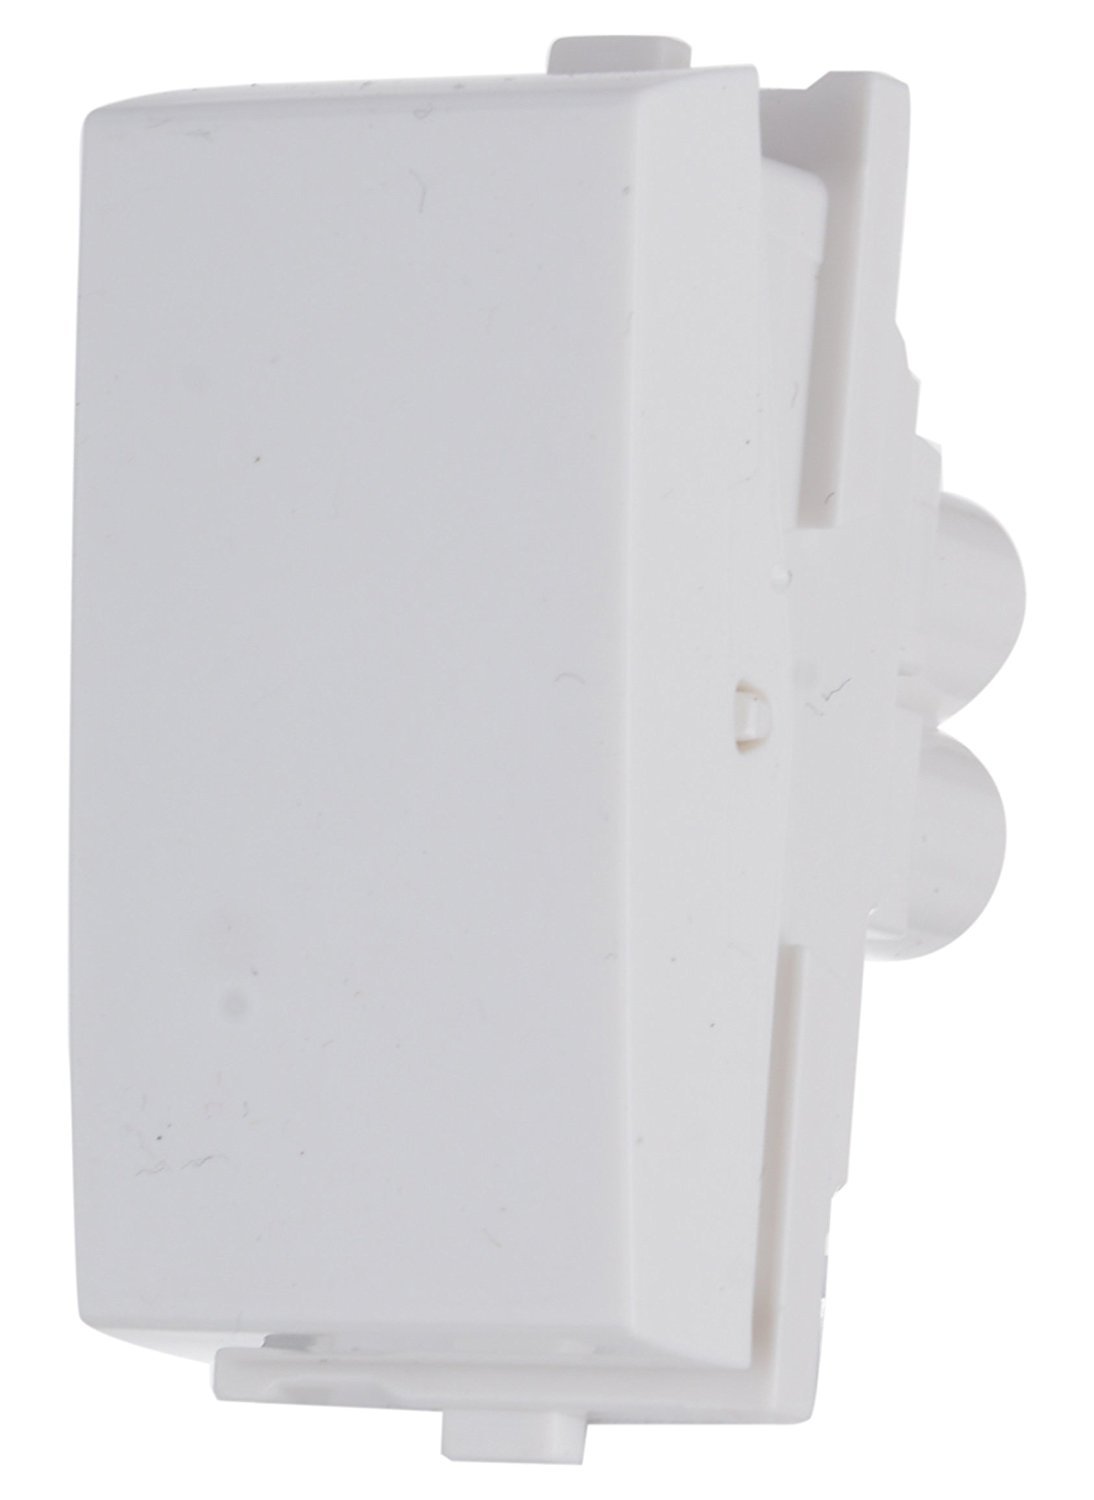 anchor electric switch price